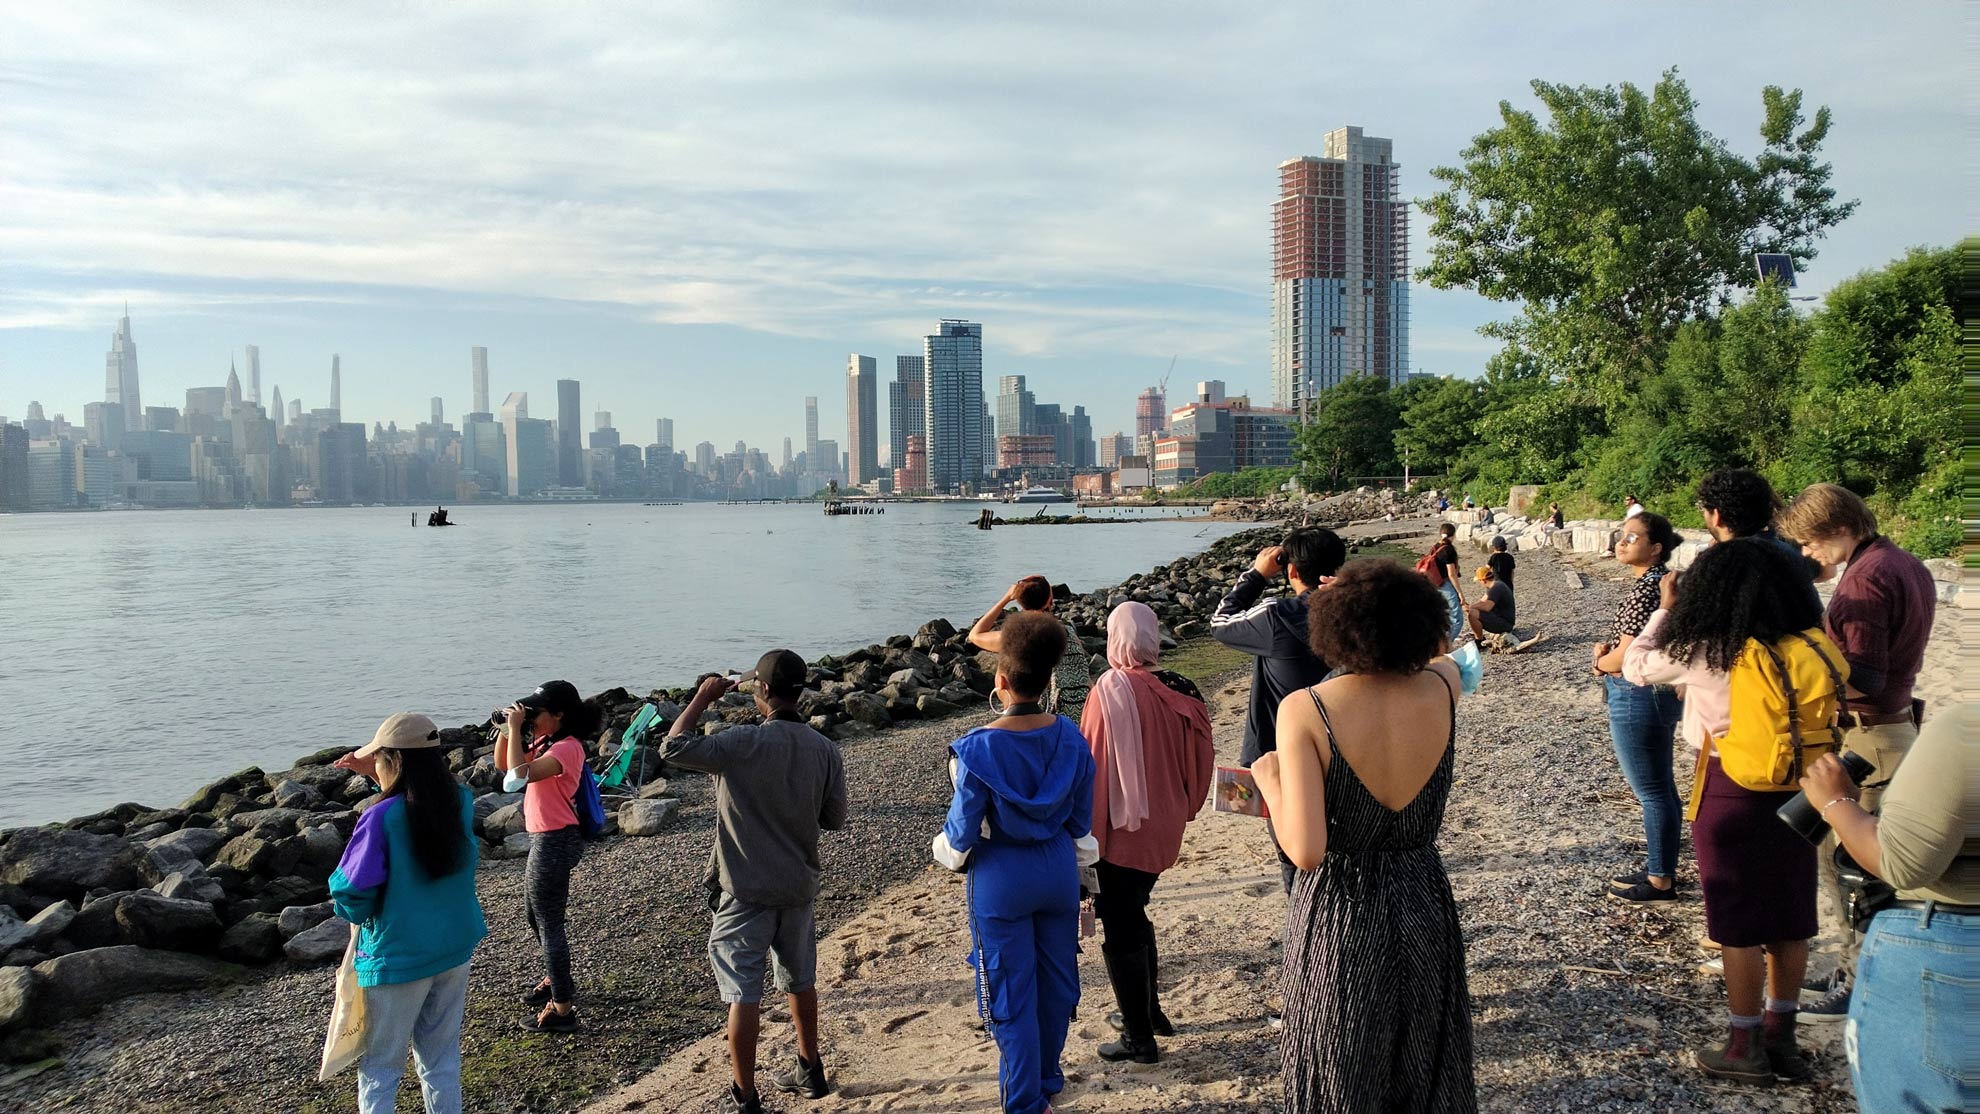 a group of men and women watch birds with a view of the New York skyline in the distance